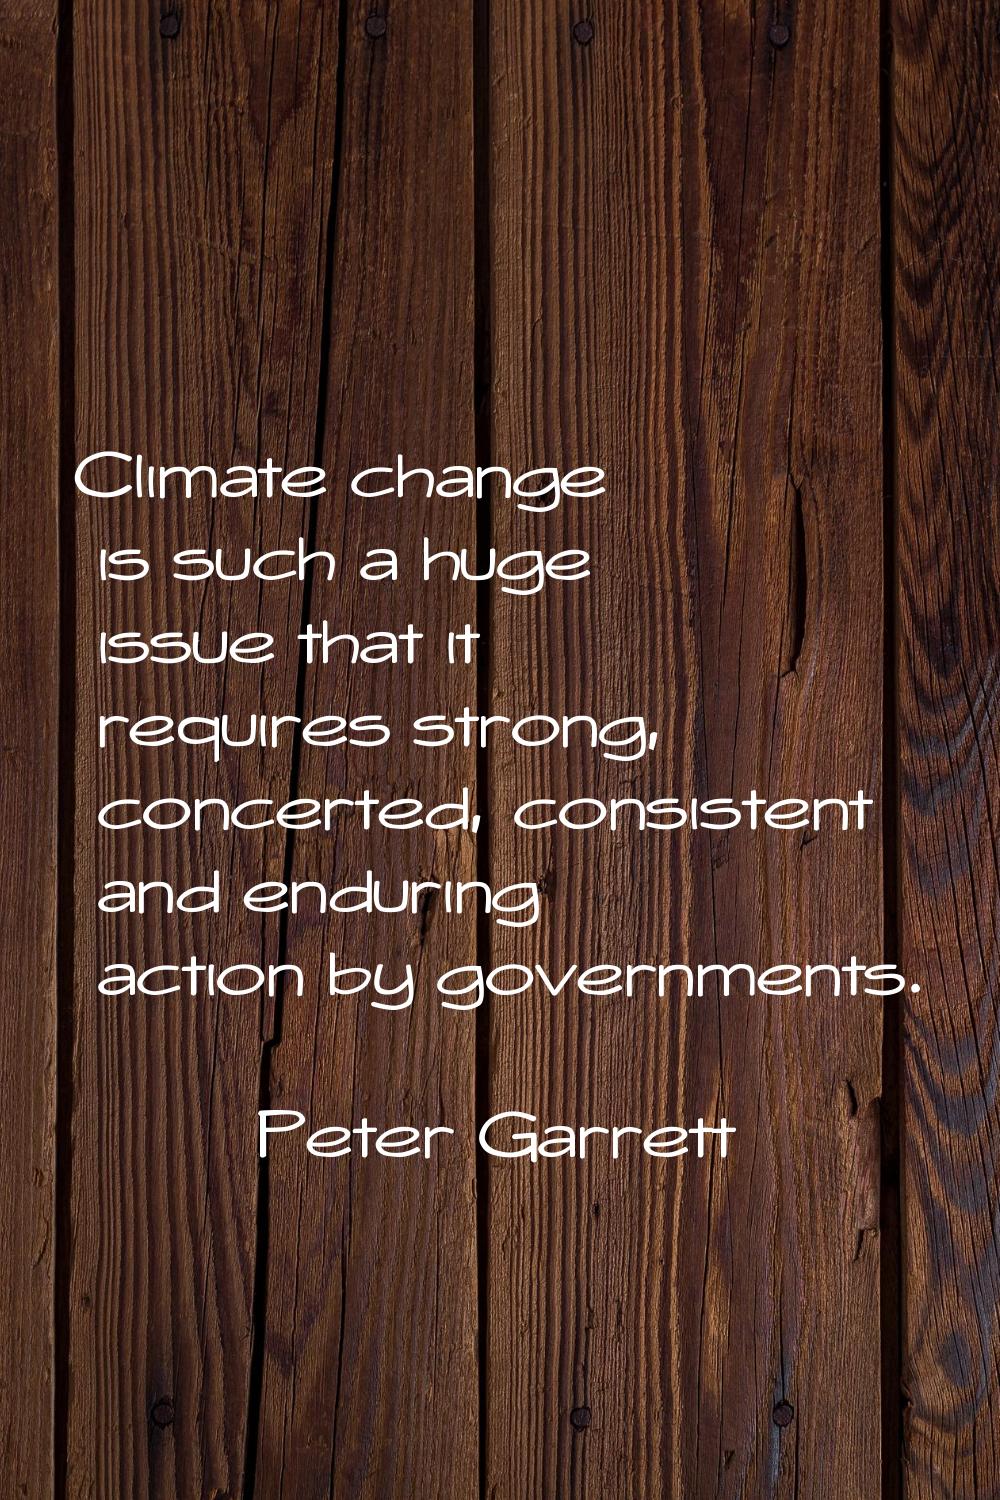 Climate change is such a huge issue that it requires strong, concerted, consistent and enduring act